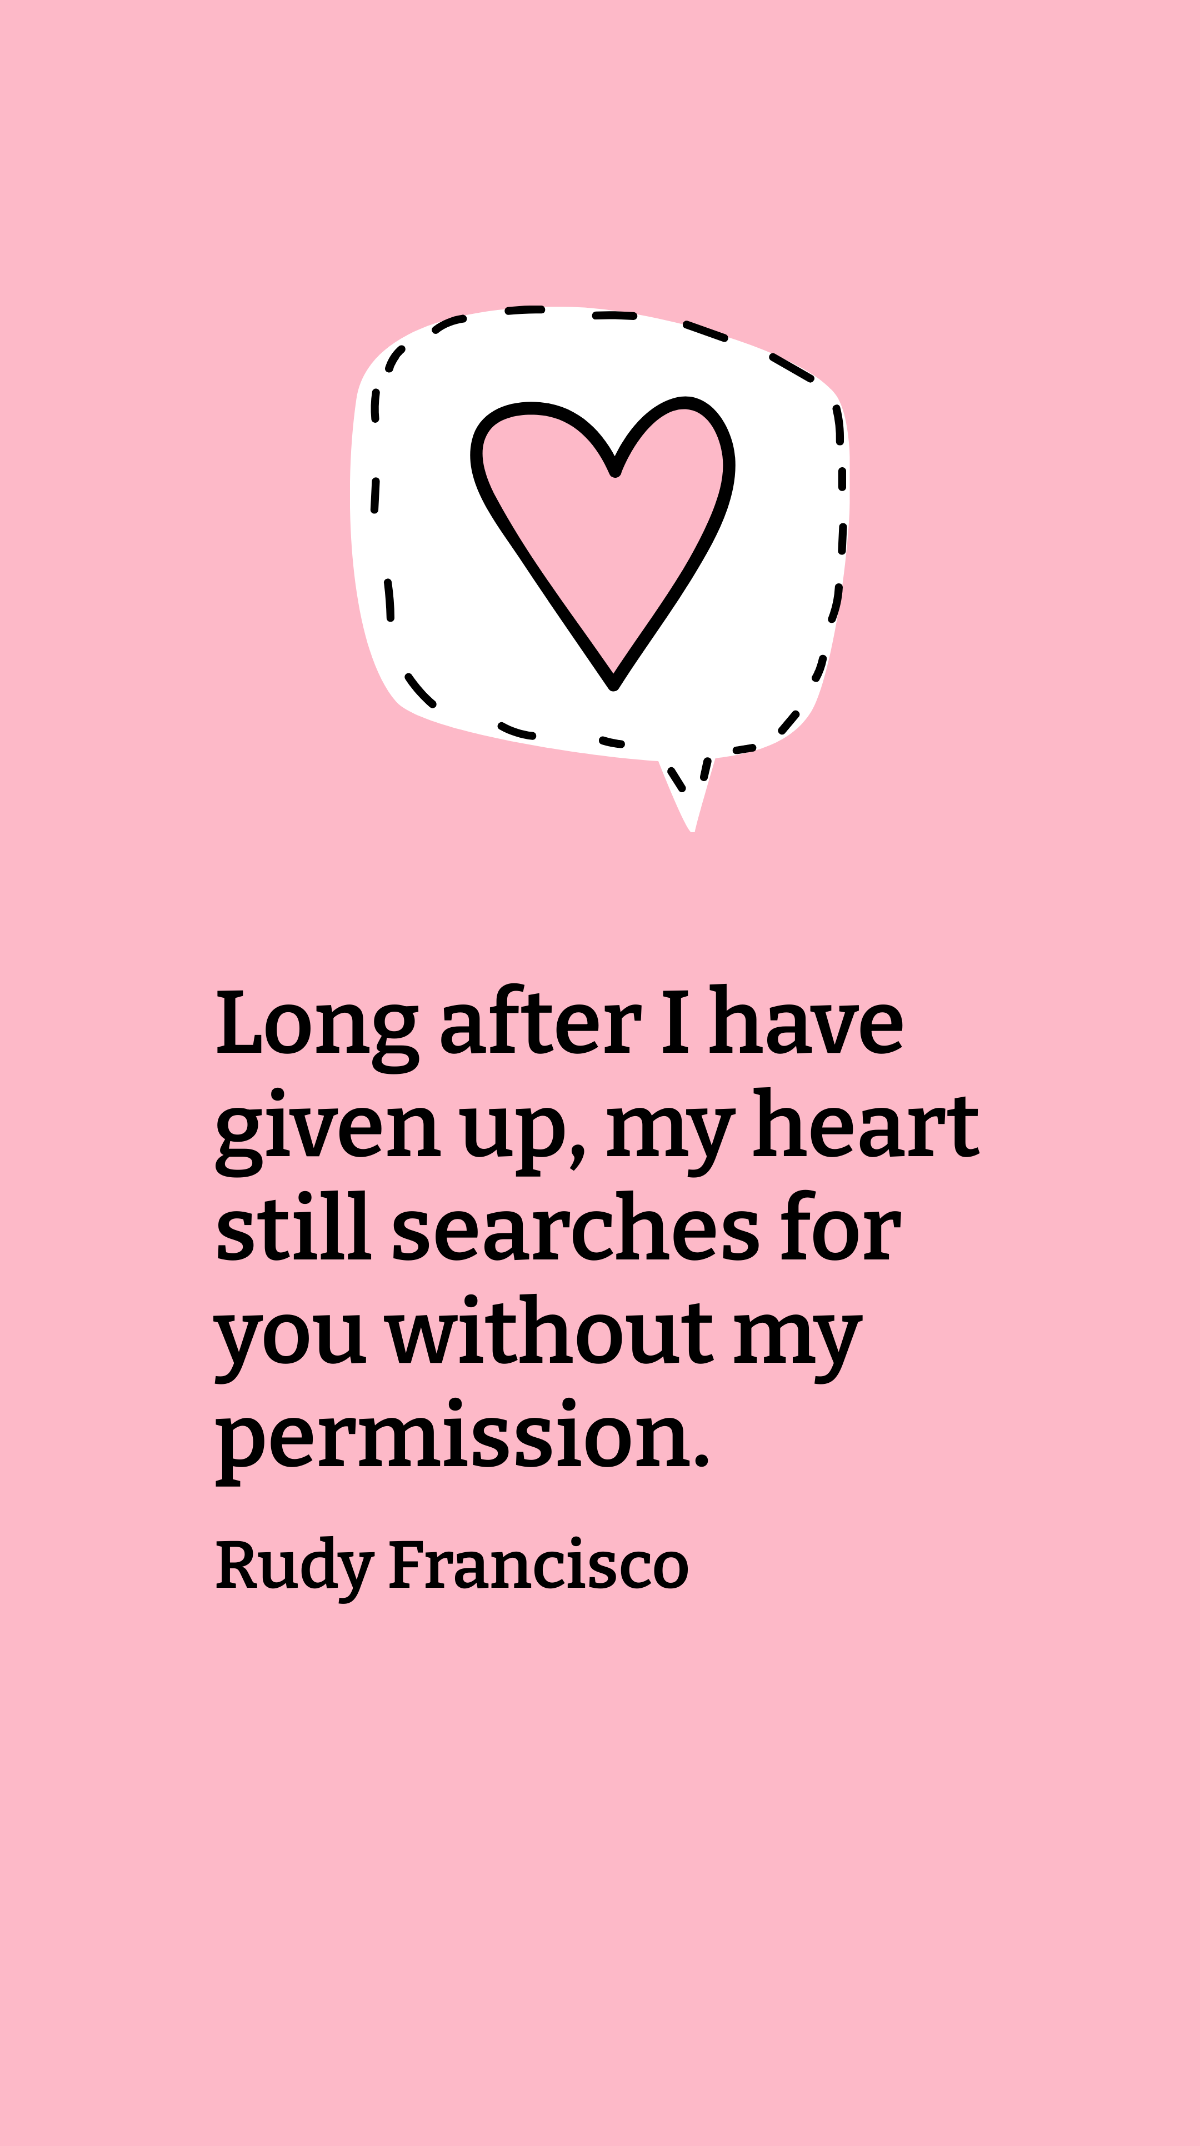 Rudy Francisco - Long after I have given up, my heart still searches for you without my permission. Template